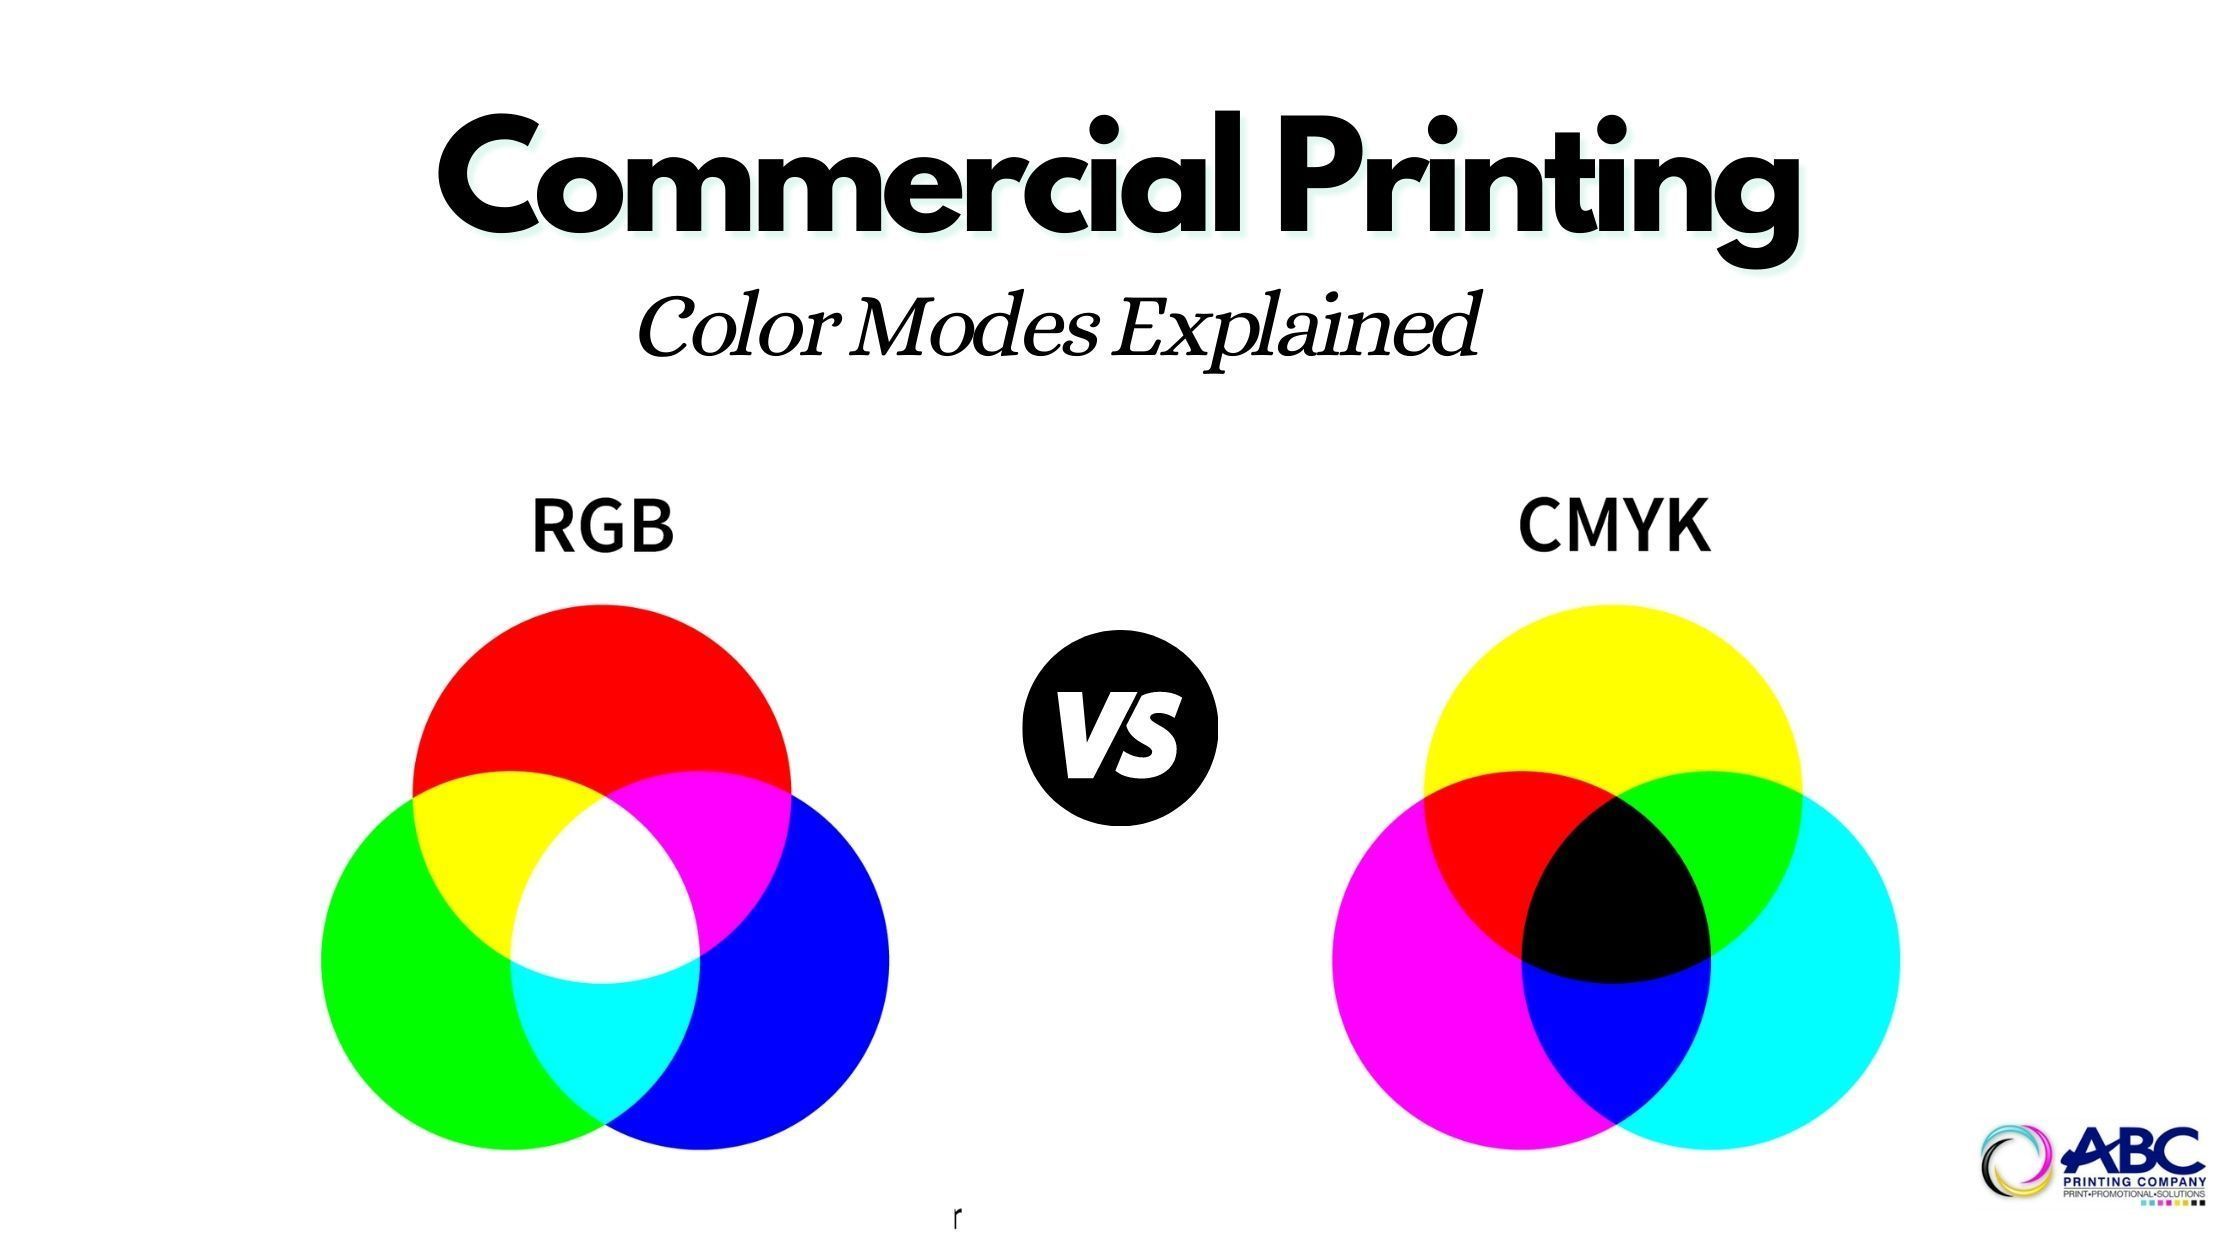 Commercial Printing: RGB and CMYK Color Modes Explained